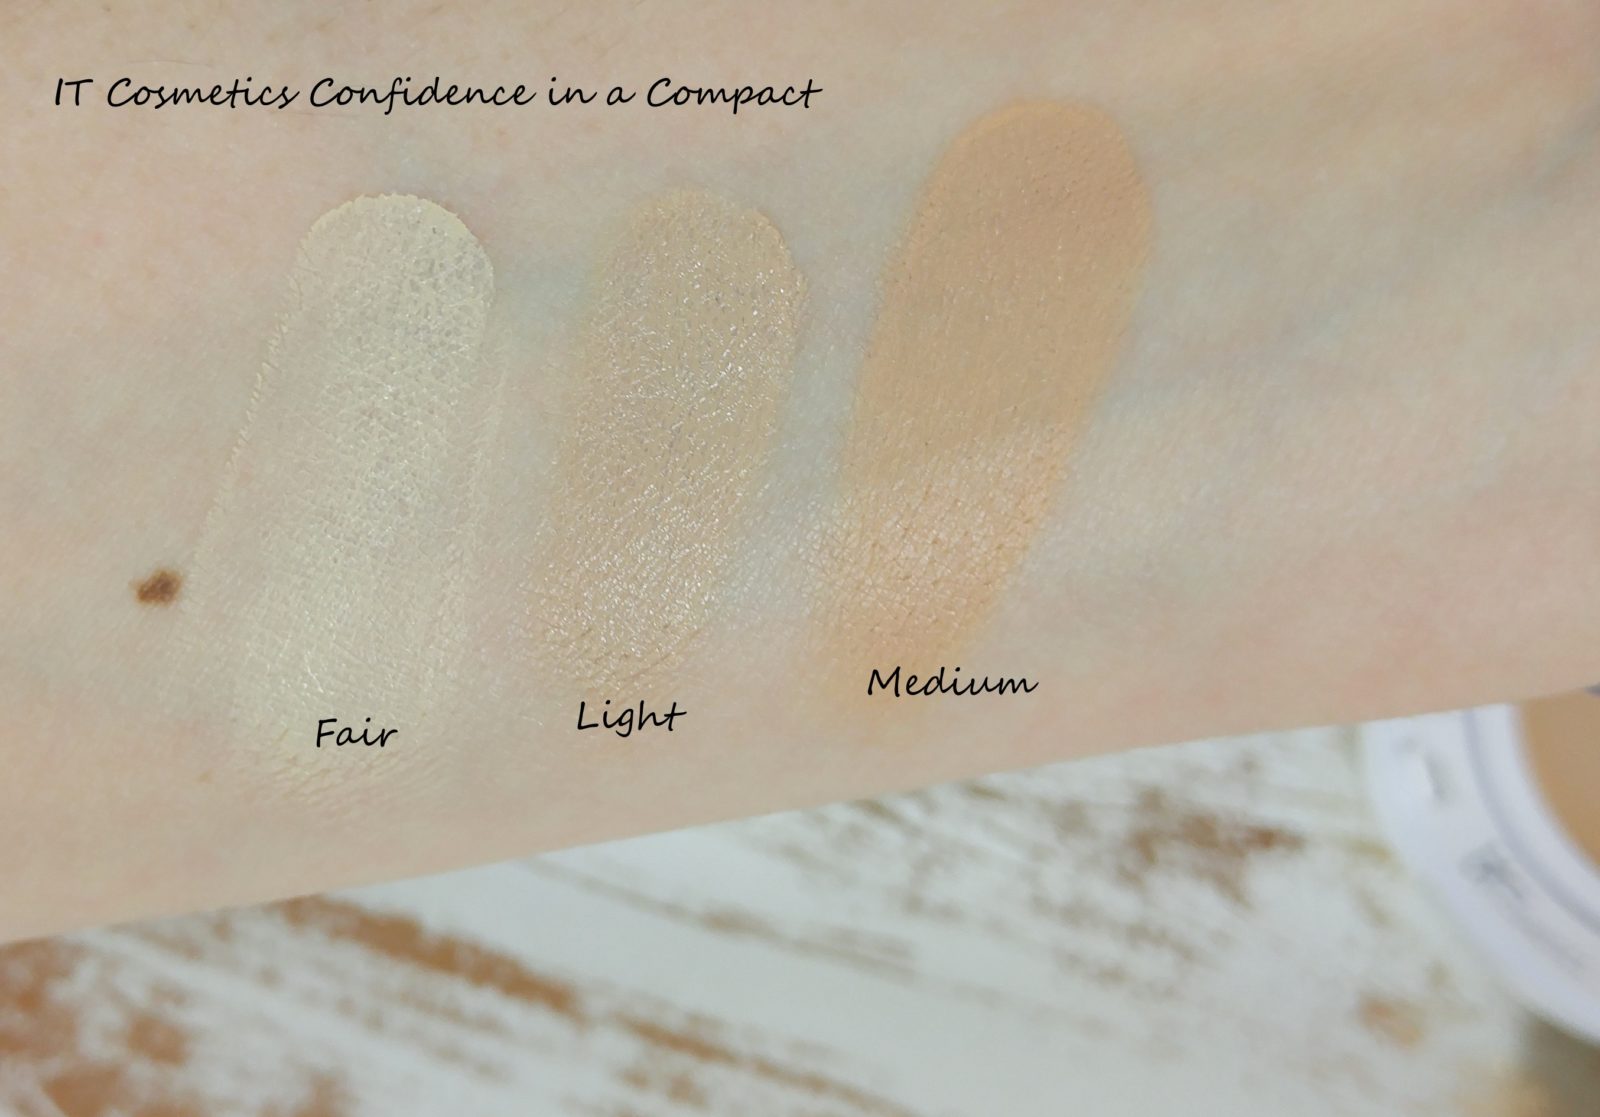 Confidence in a Compact Swatches Fair Light Medium